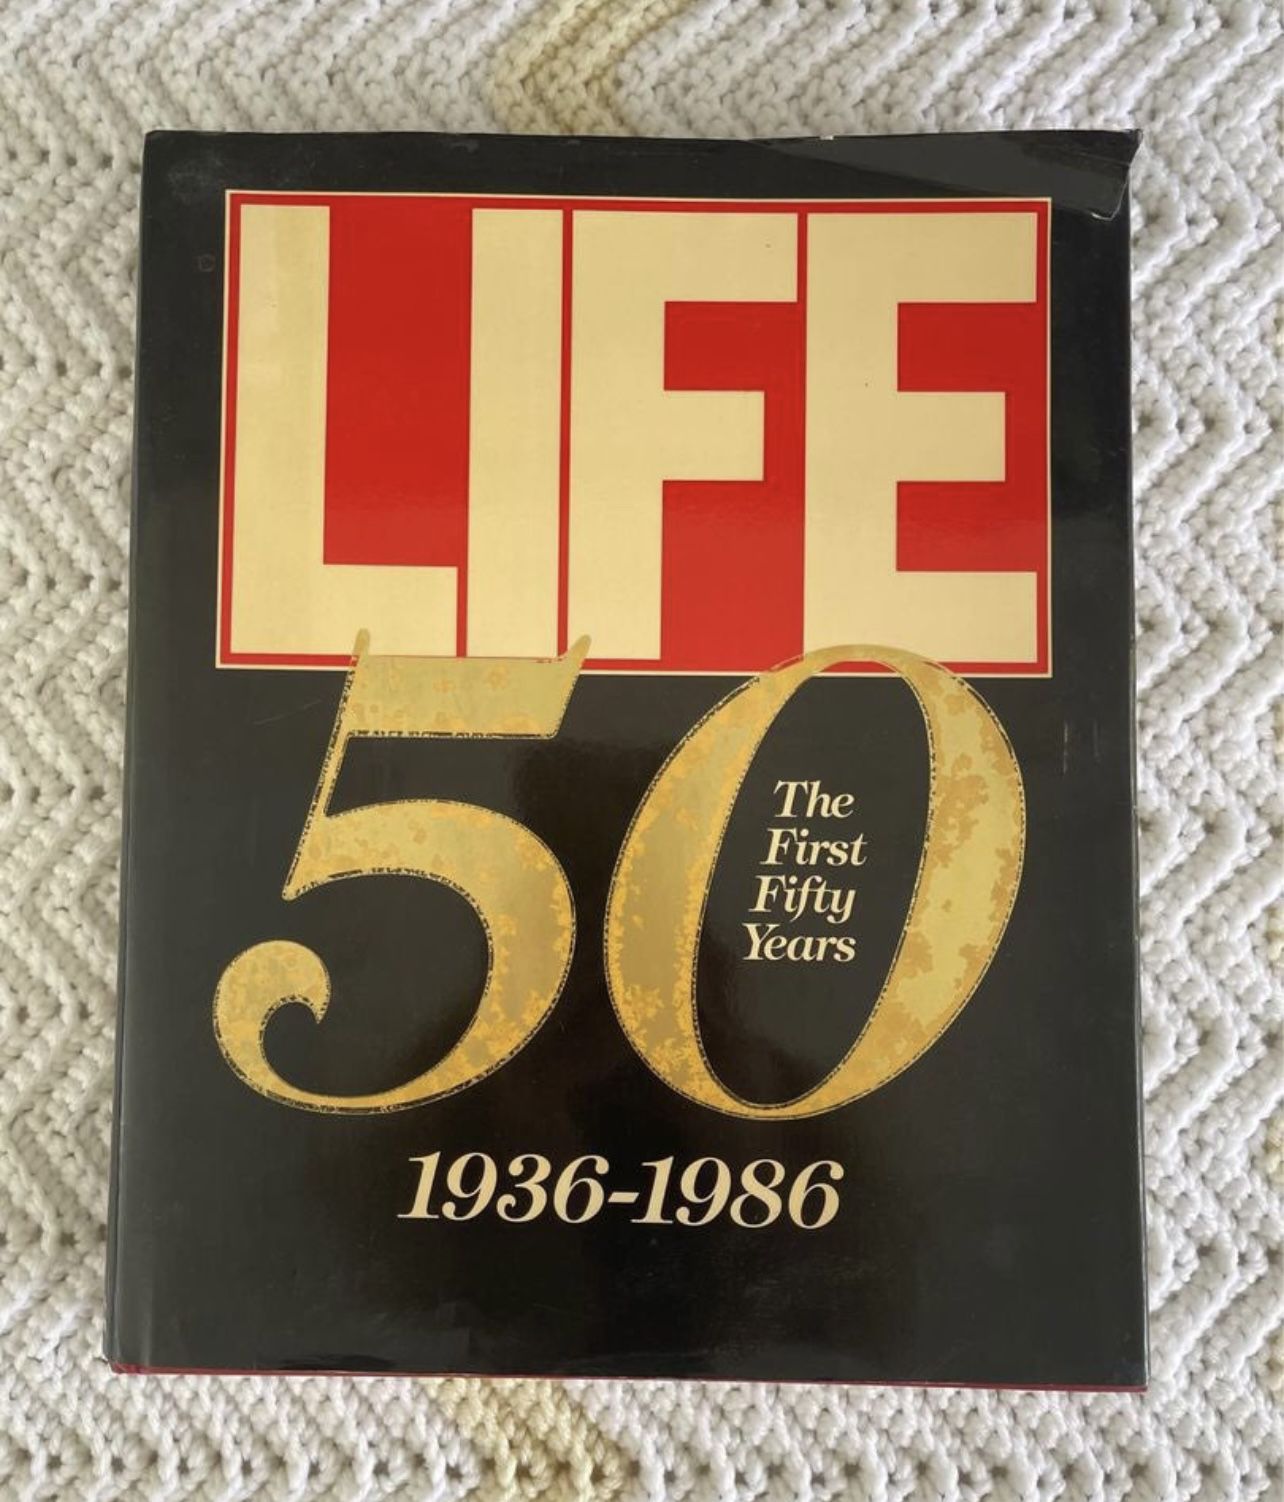 Life 50: The First 50 Years 1(contact info removed) Book